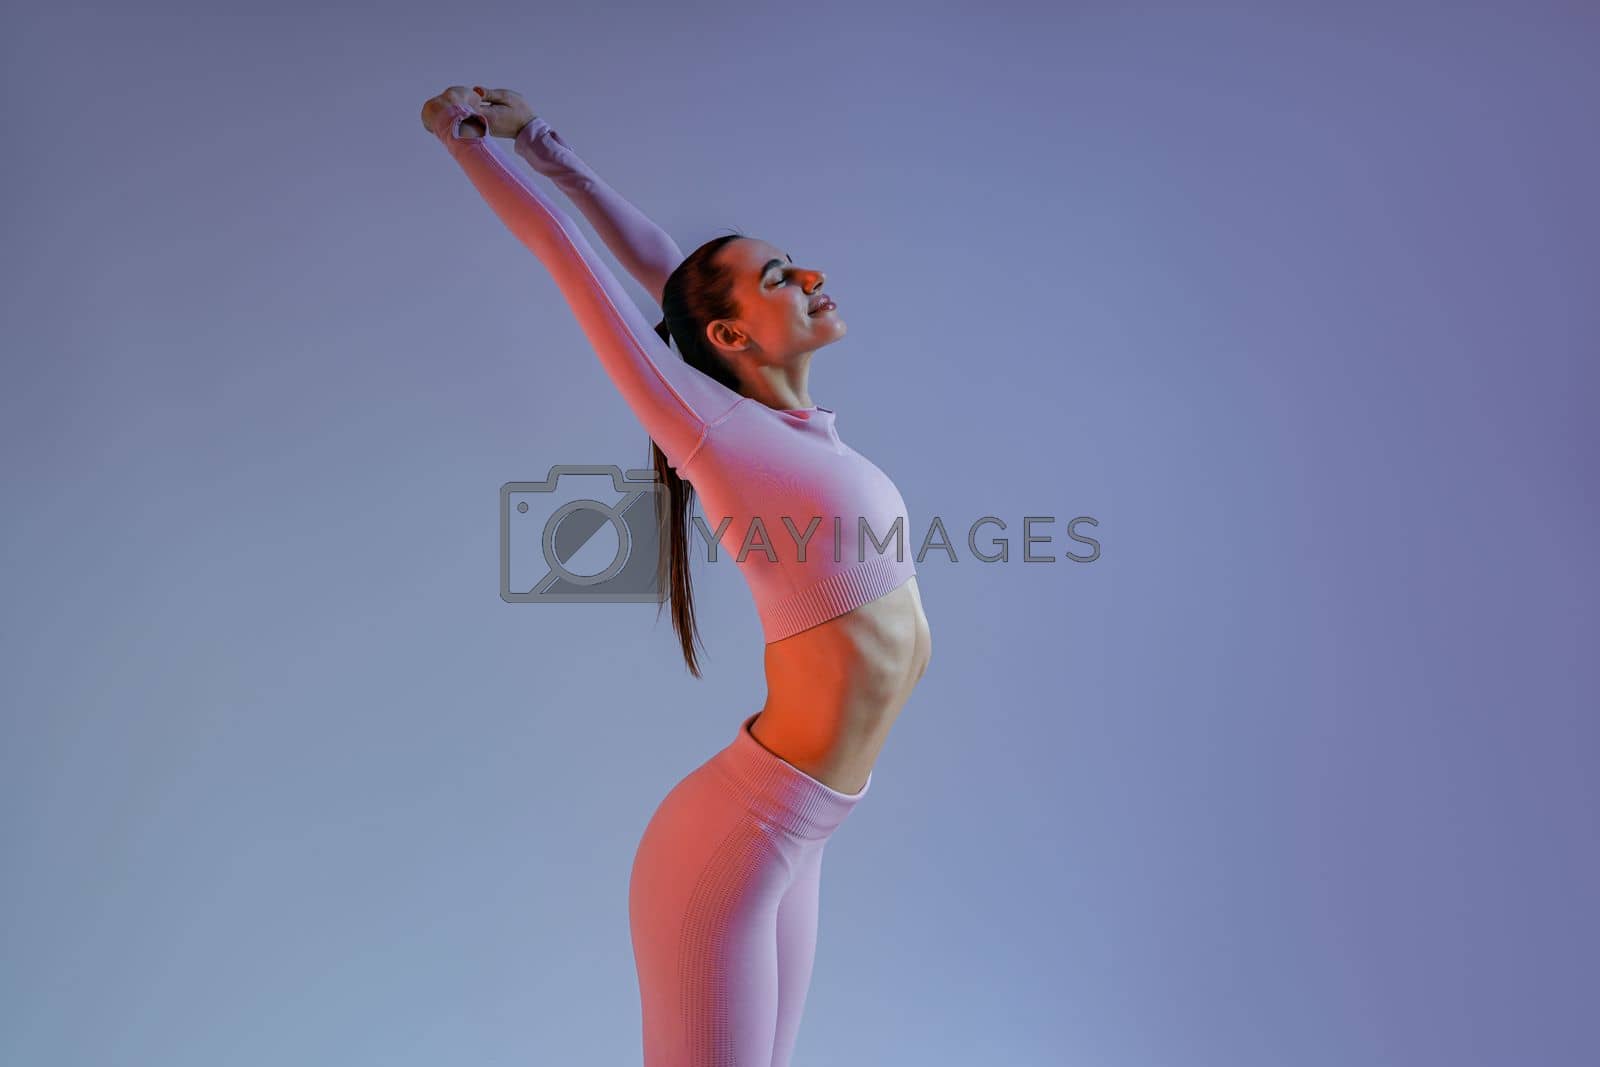 Royalty free image of Close up of woman wearing sportswear doing warm-up before training session on studio background by Yaroslav_astakhov